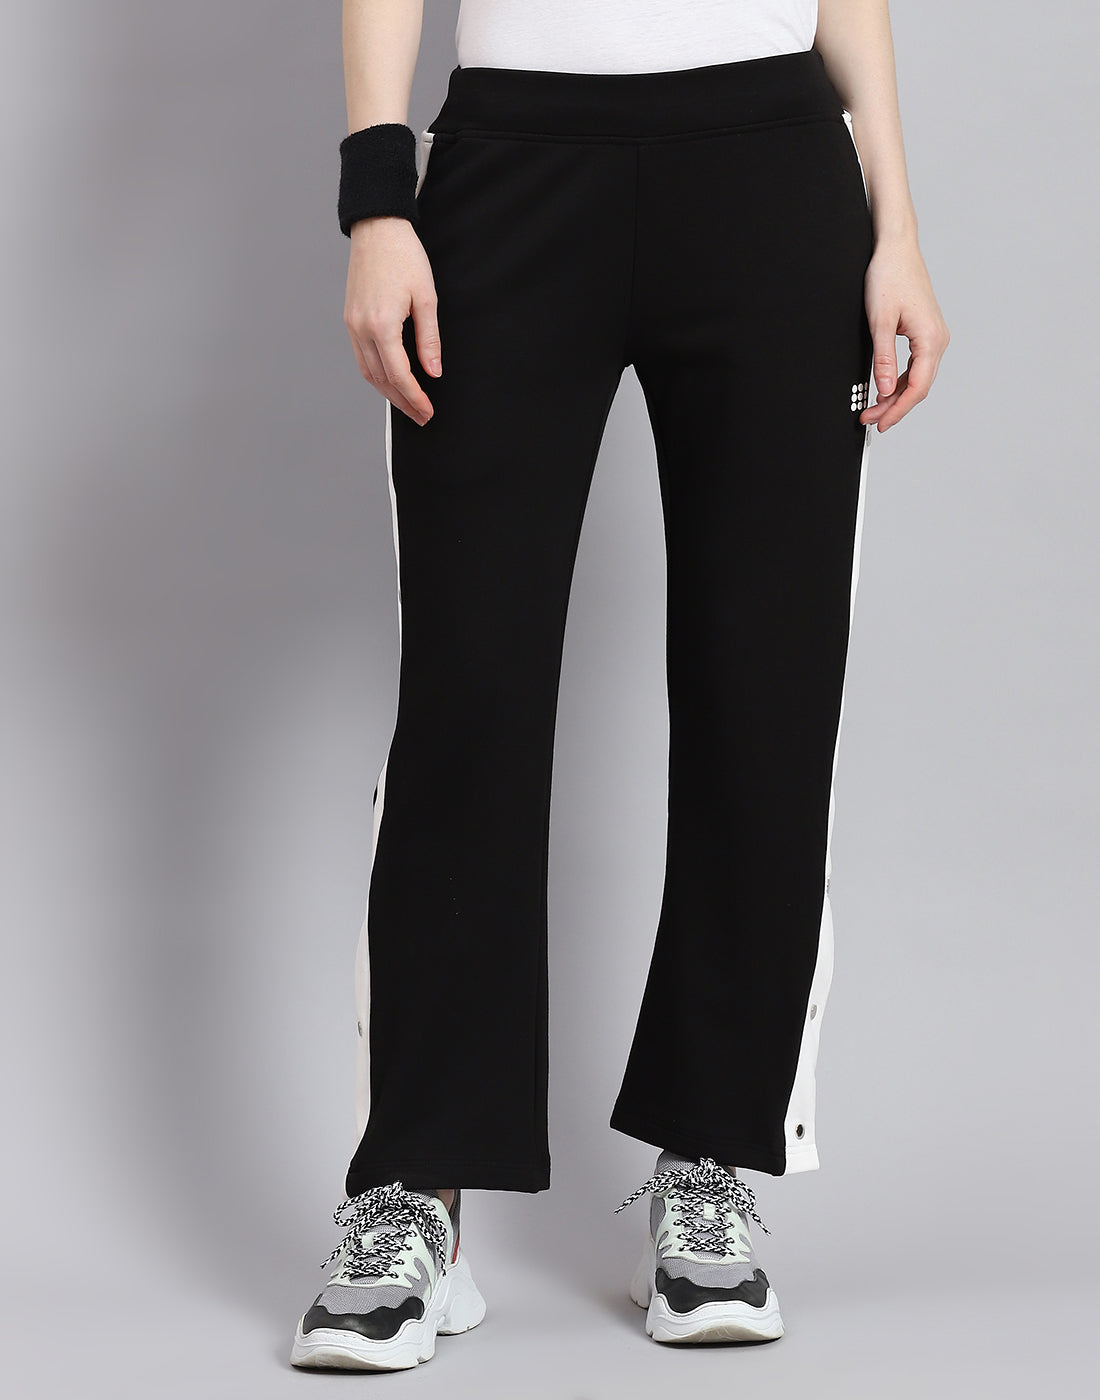 Plain Black Straight Pant For Girls at Rs 329/piece in Ludhiana